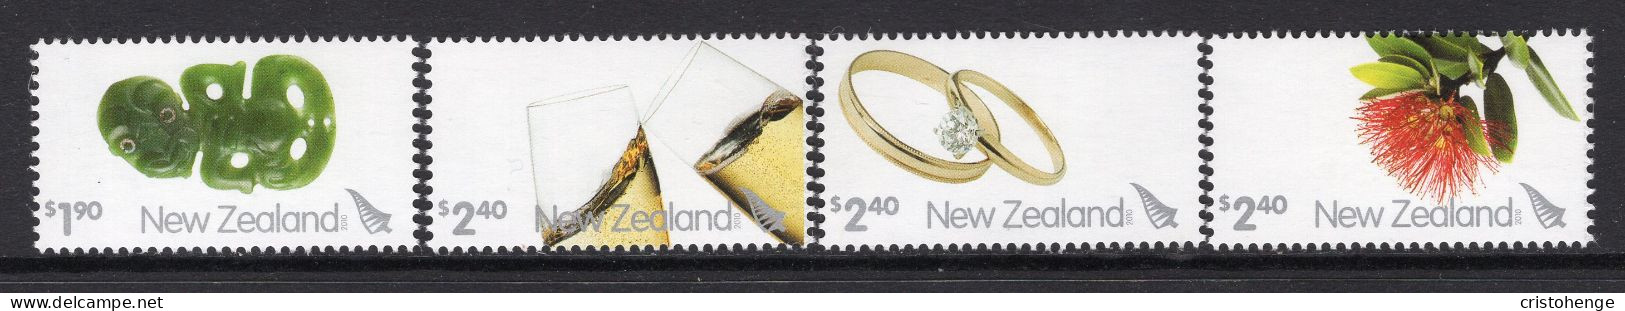 New Zealand 2010 Personlised Stamps - $1.90 Values Set From MS MNH (from SG MS3238) - Nuevos